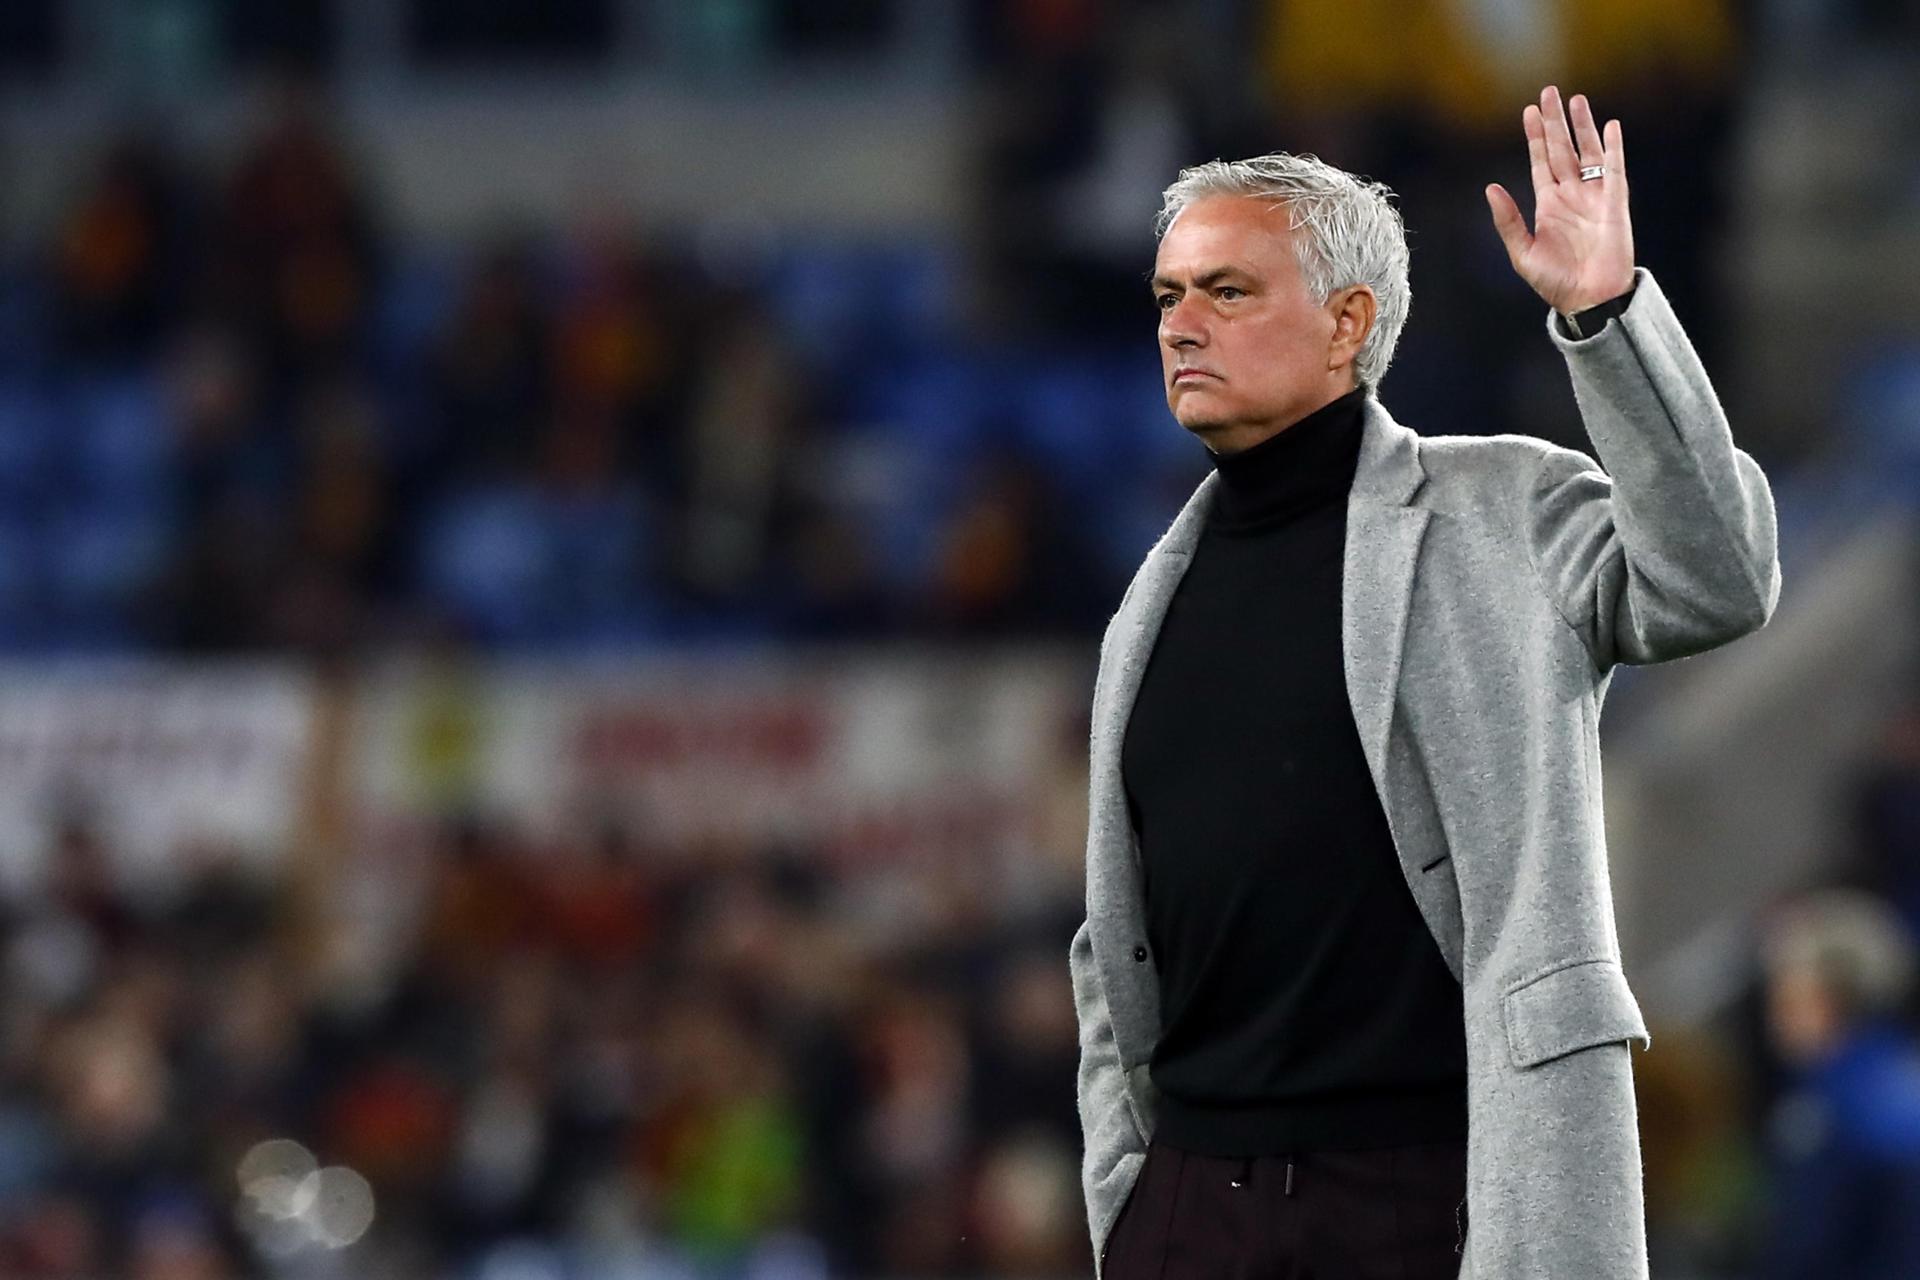 Mourinho gives up on big leagues, closer to Fenerbahce